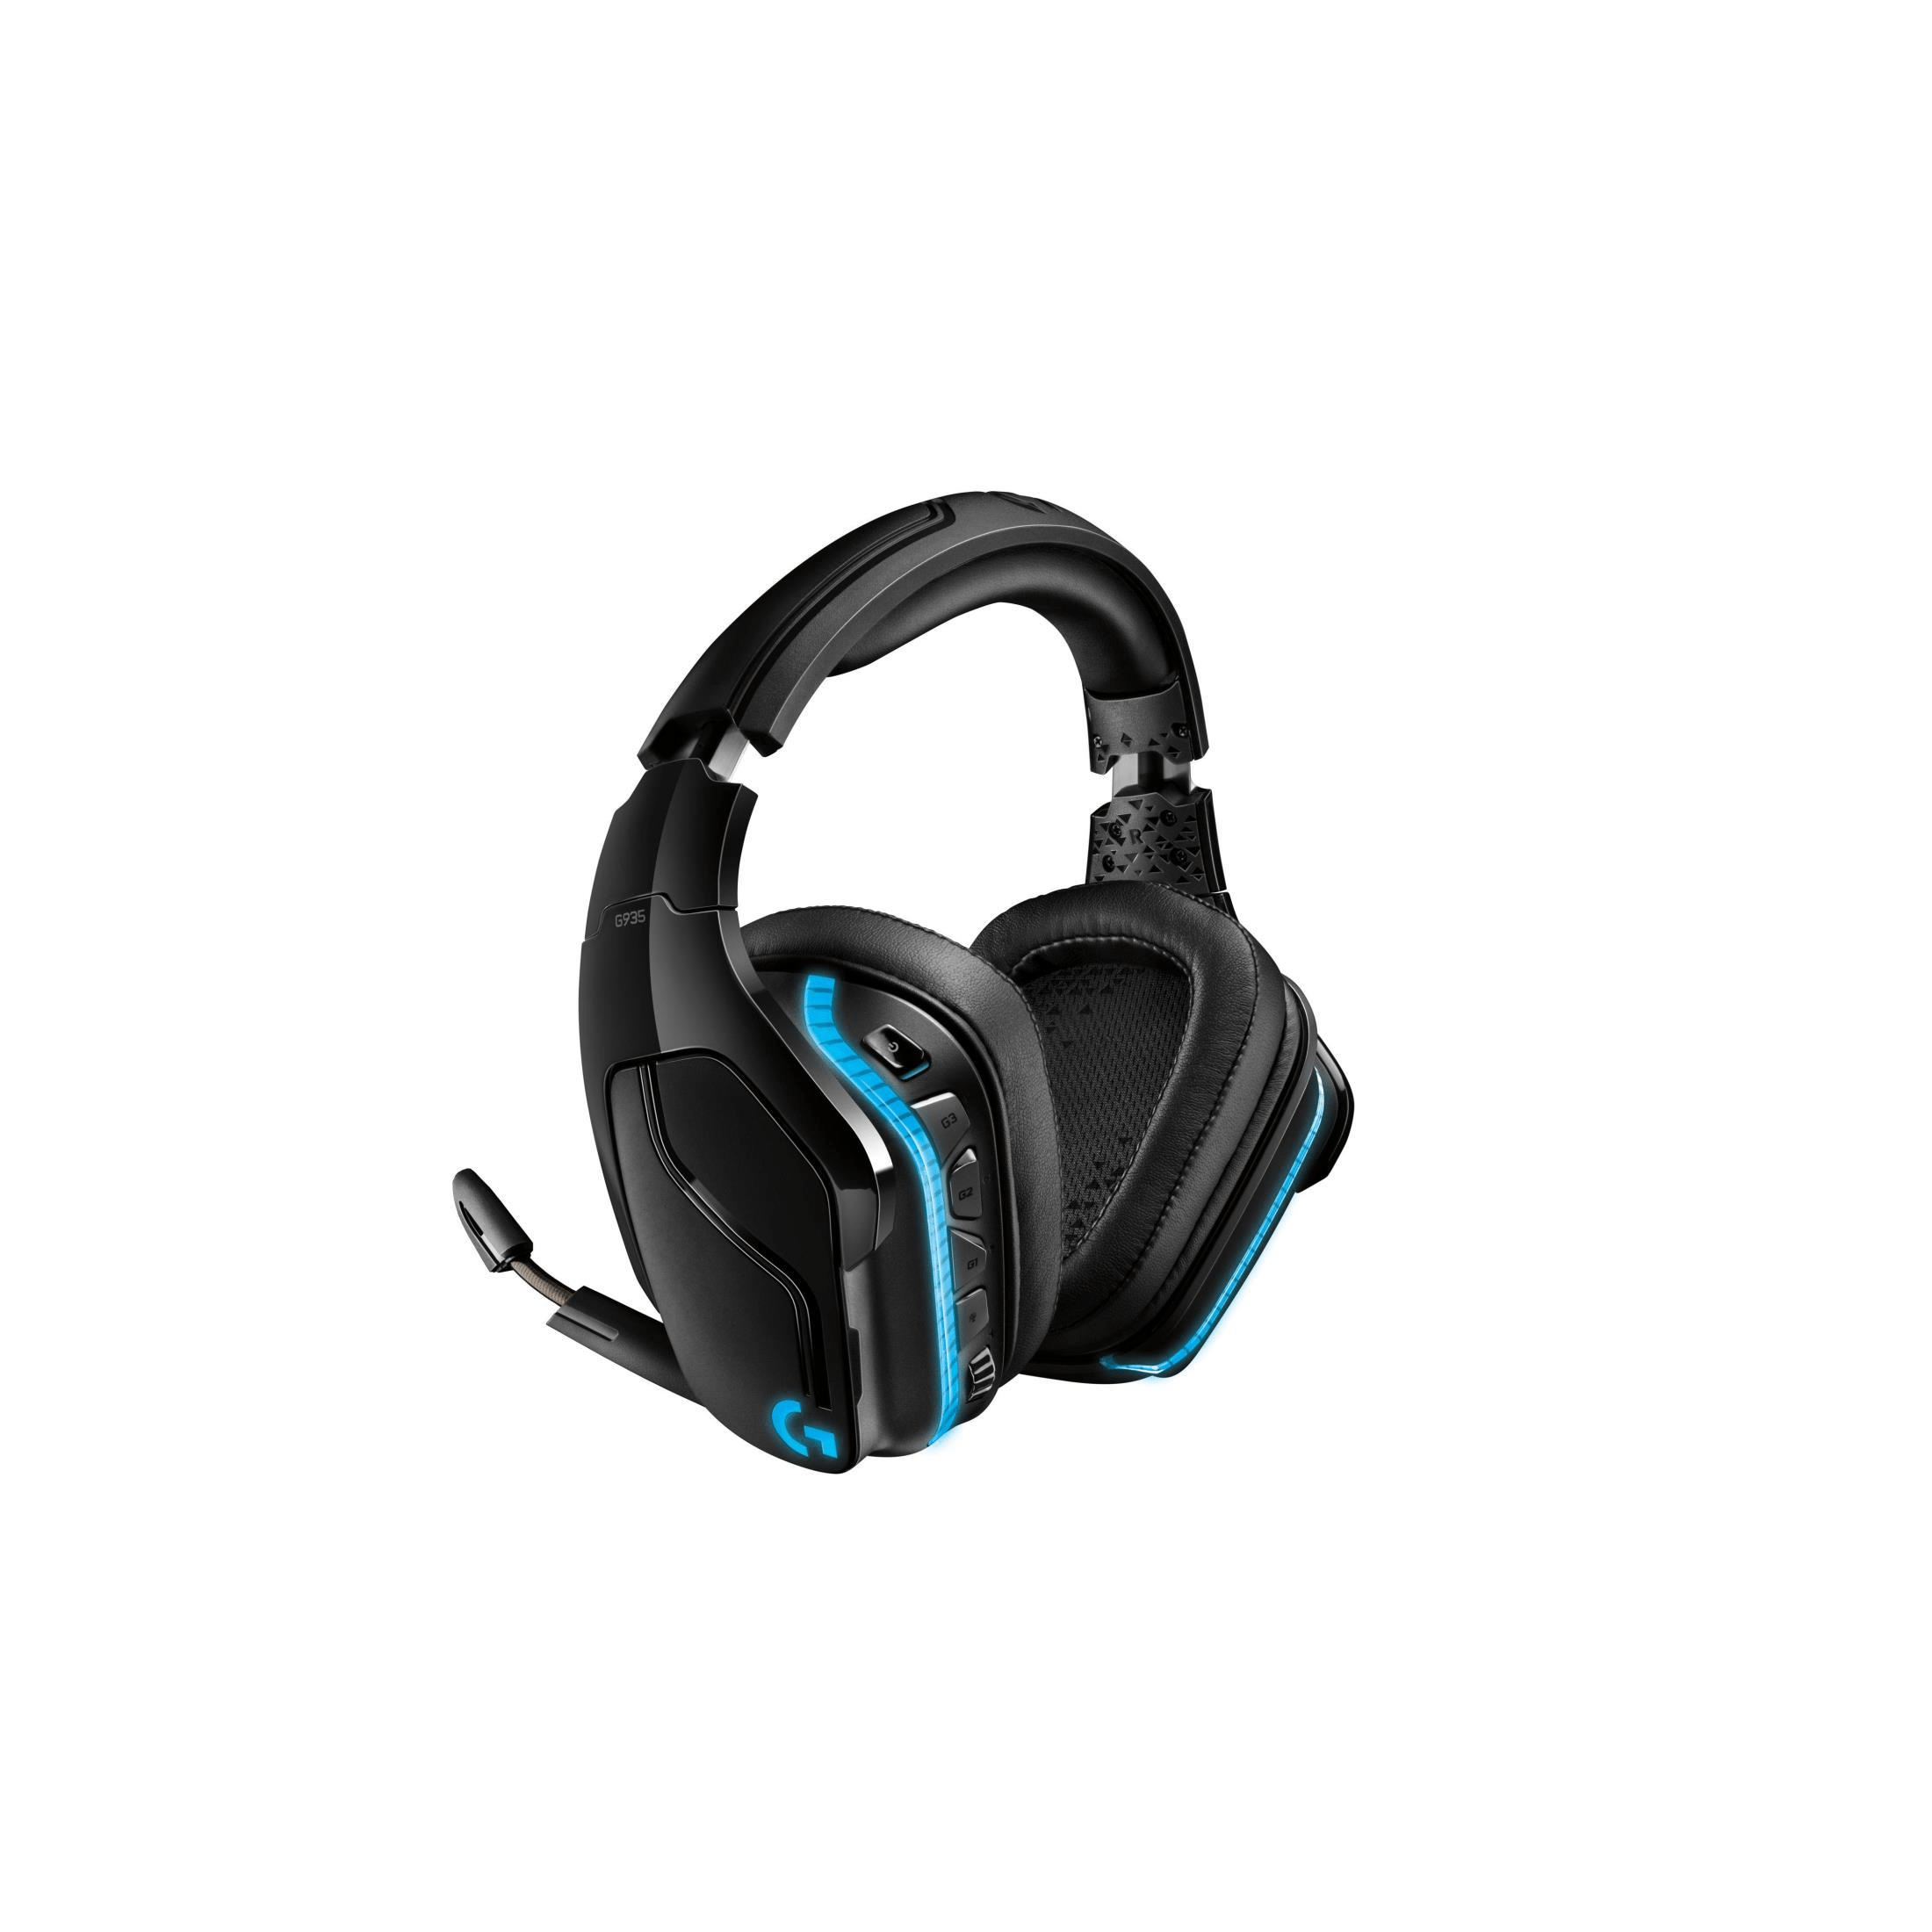 Logitech G735 Gaming Headset Review – Small, But Powerful